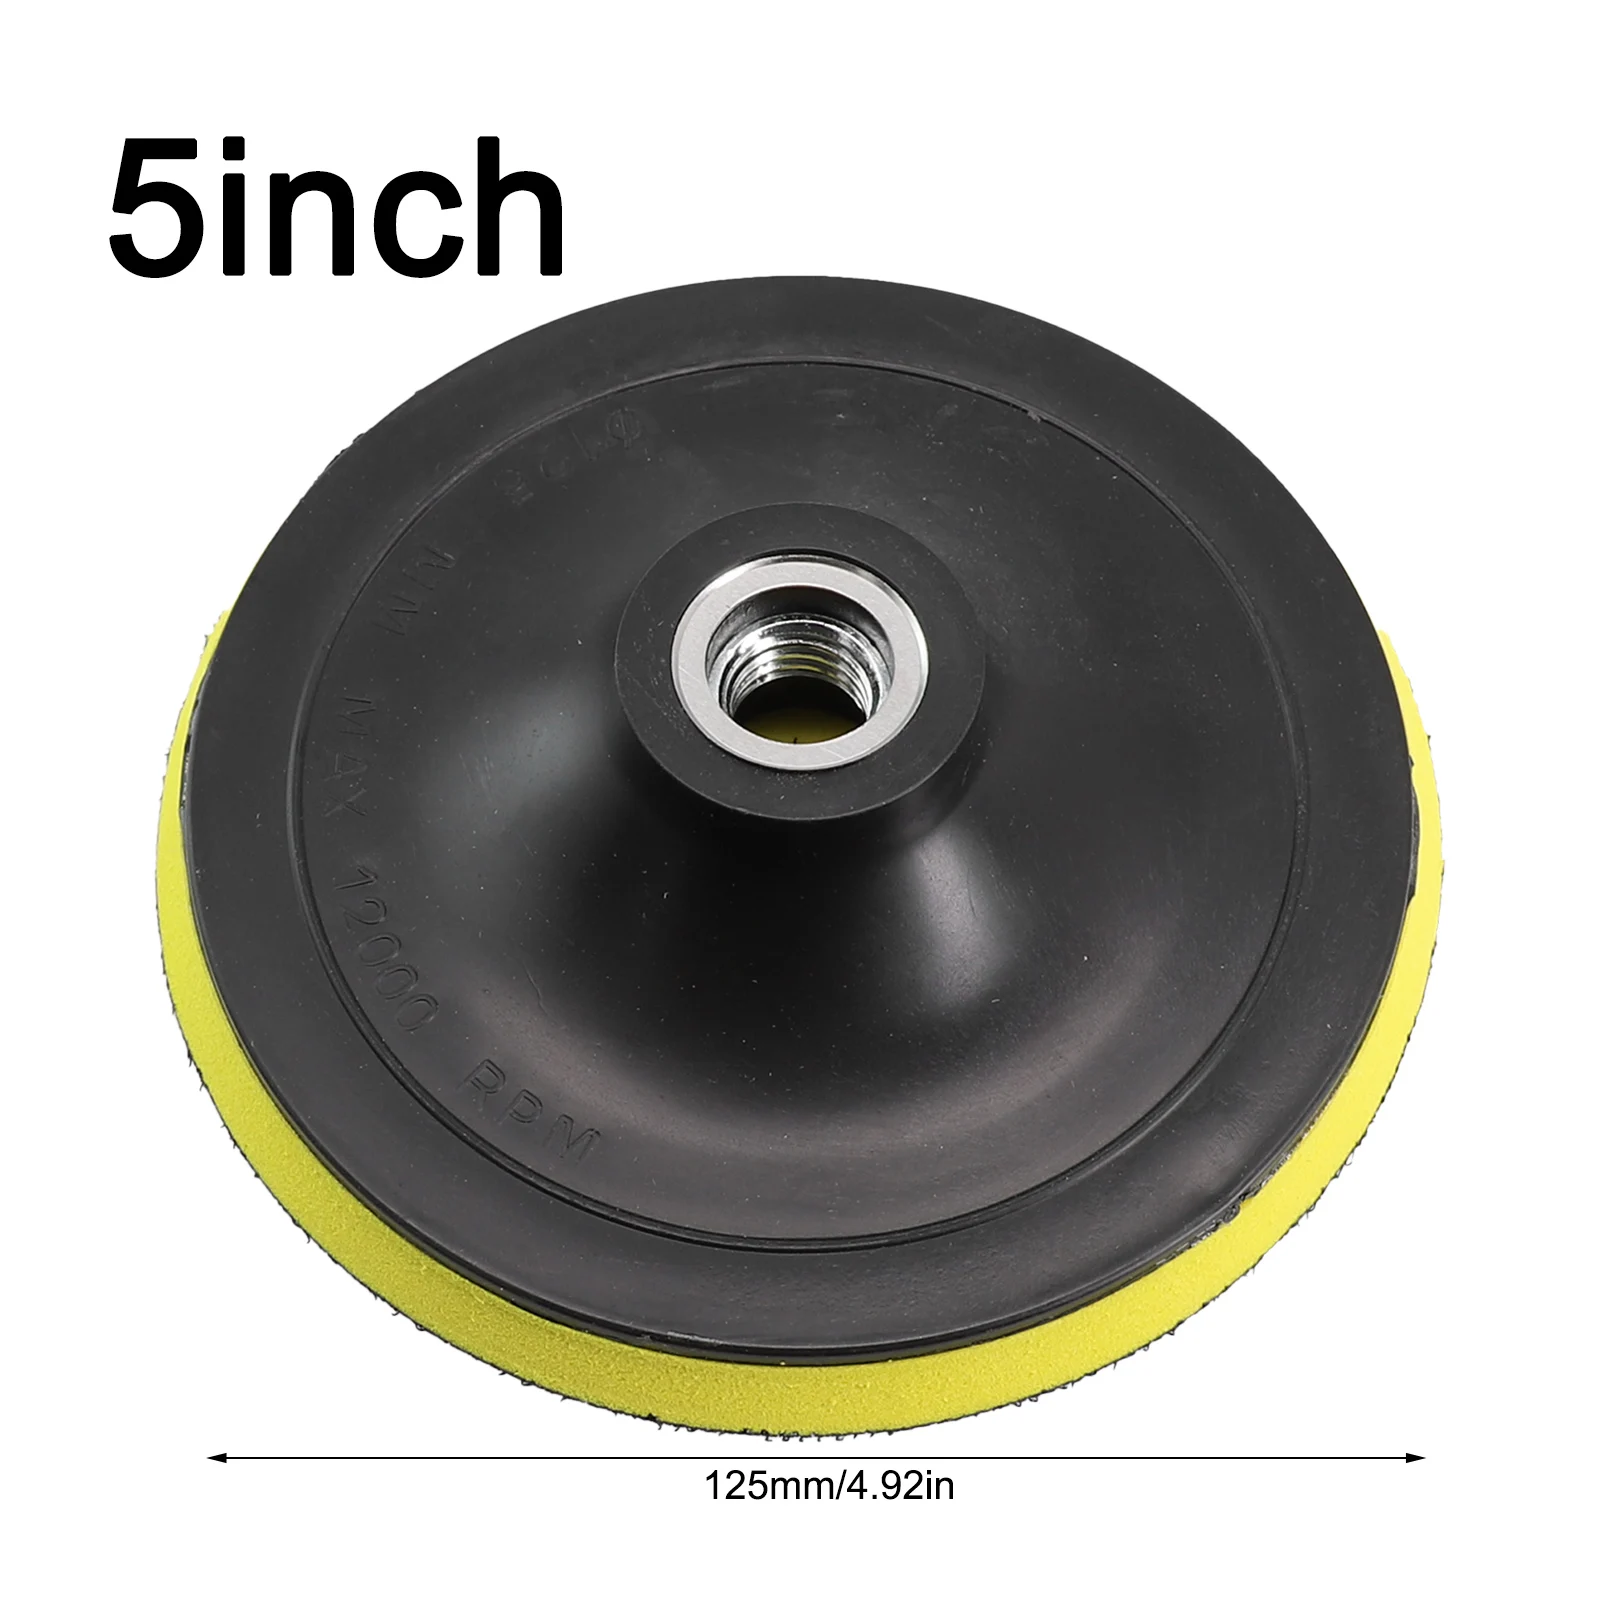 

5 Inch 125mm Sanding Backing Pads M10 M14 Drill Adapter Hook And Loop Buffing-Wheel Abrasive Sanding Disc For Power Sander Tools